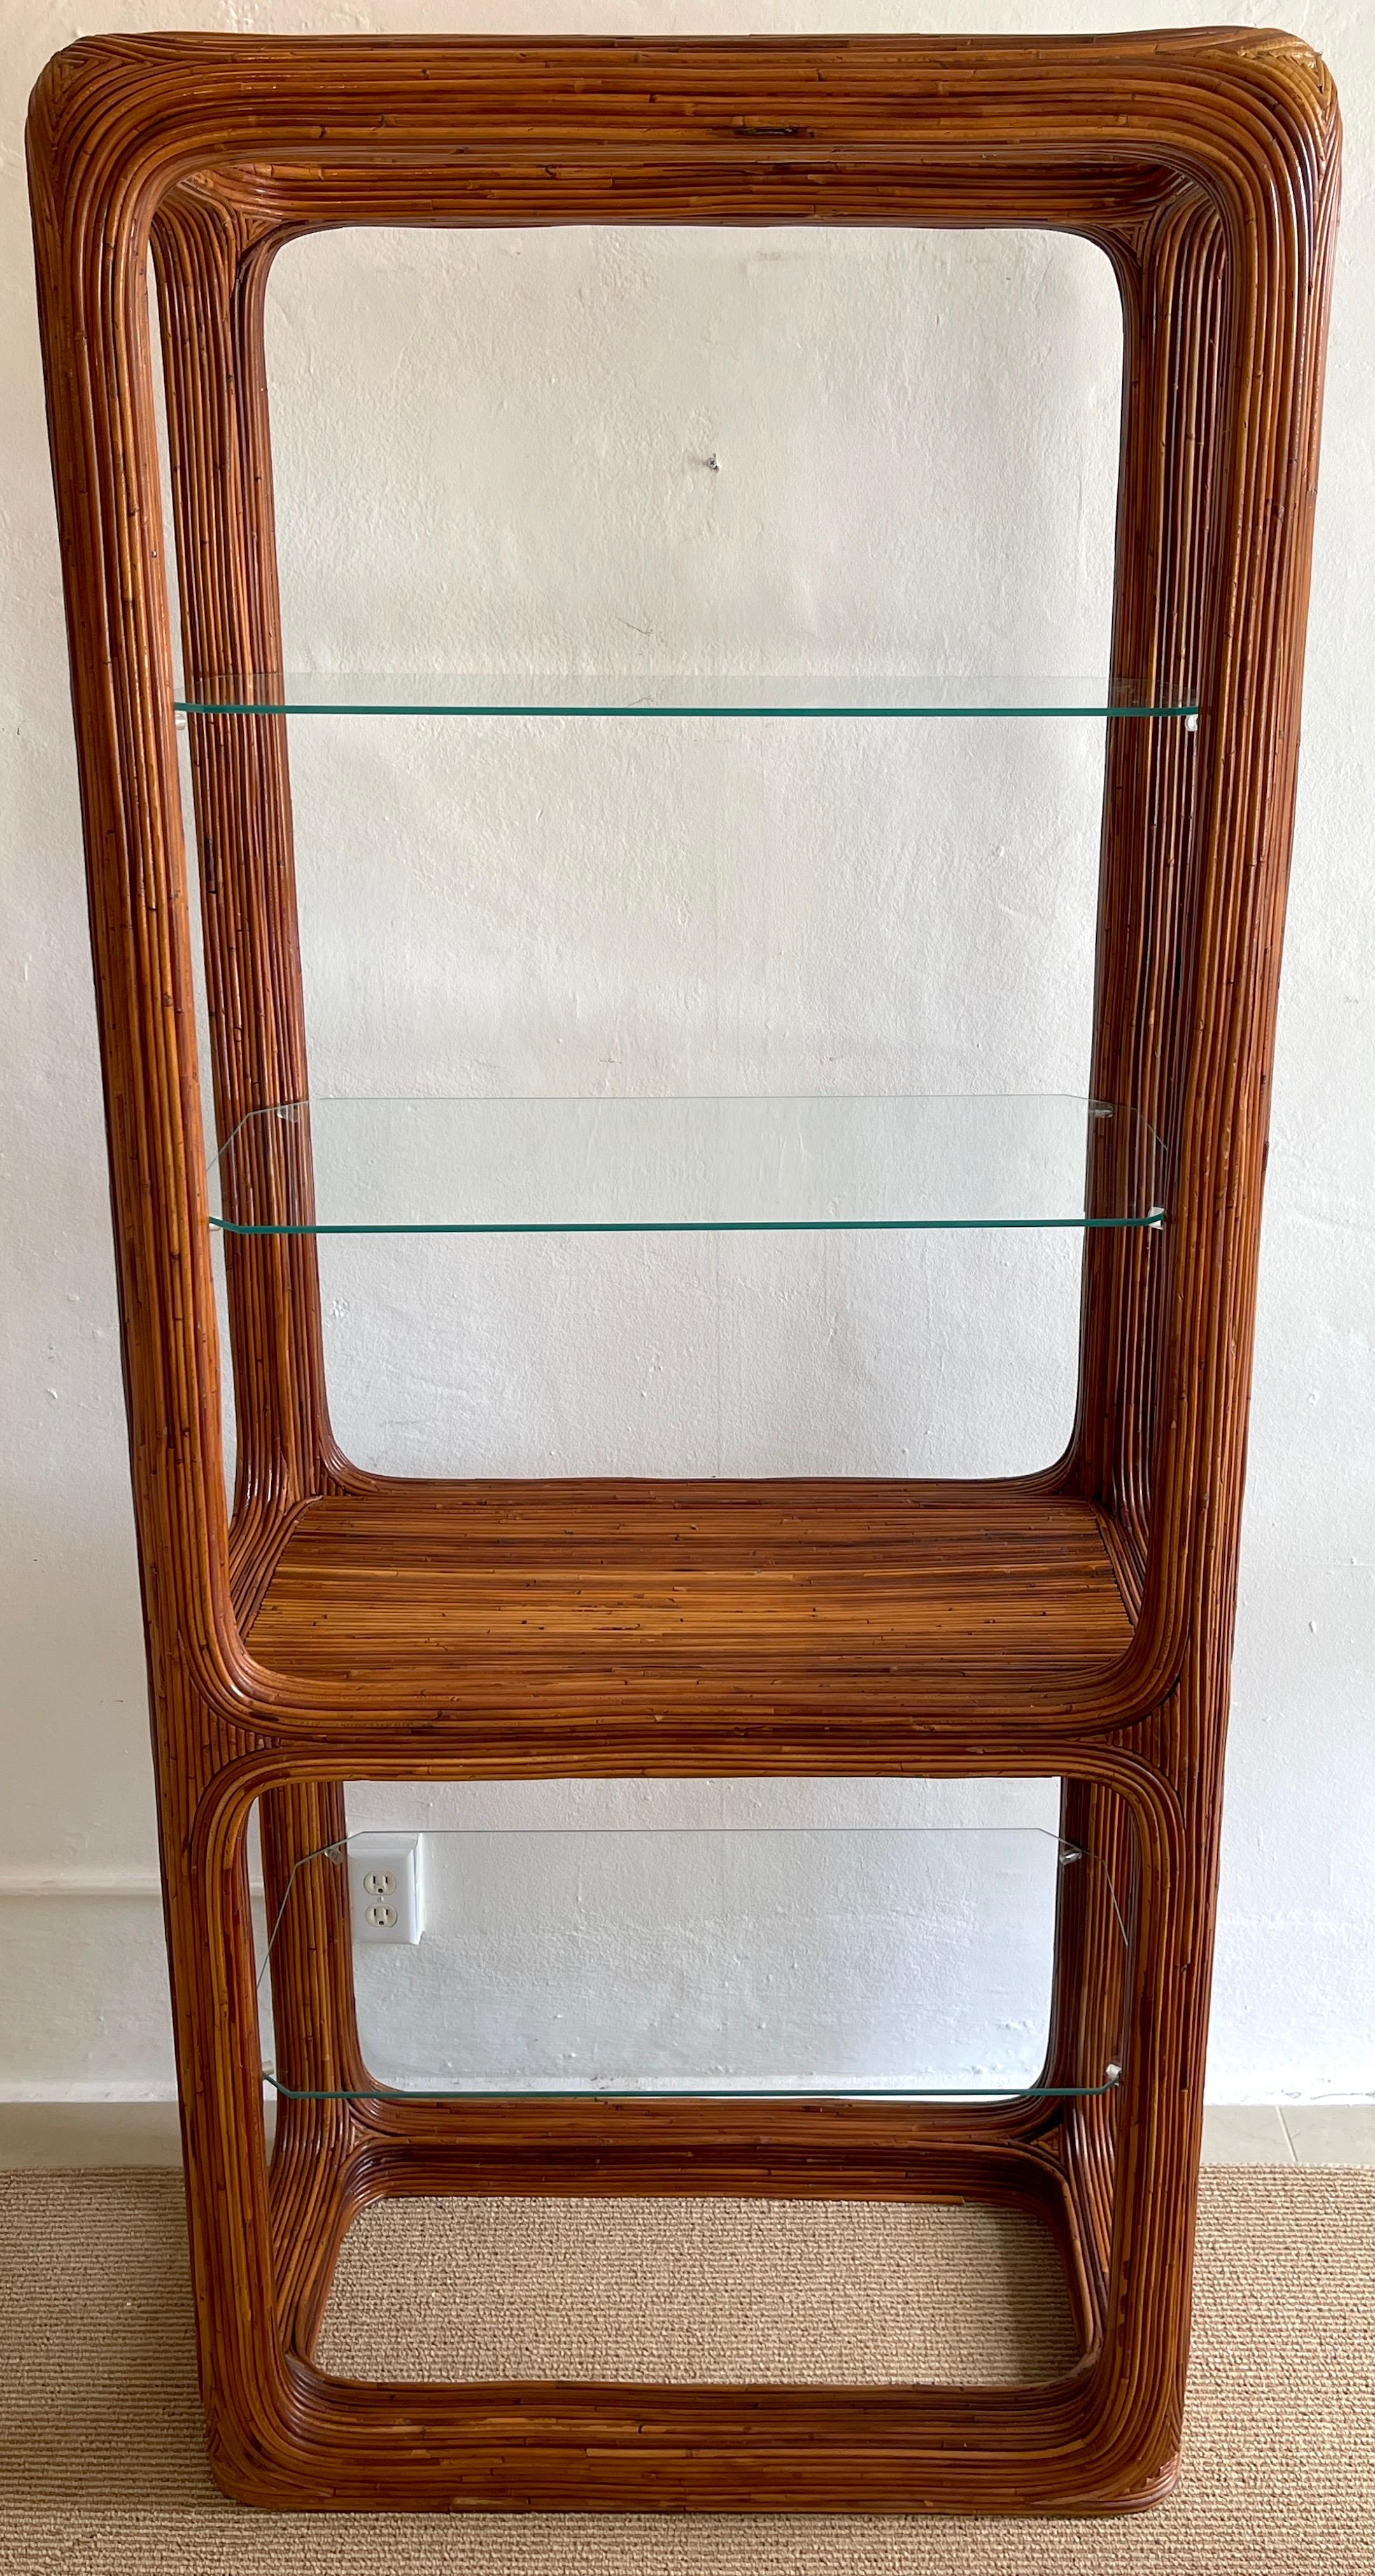 1970s sculptural rattan & glass etagere
The case with continuous book-matched rattan 
The upper section measures 24.5